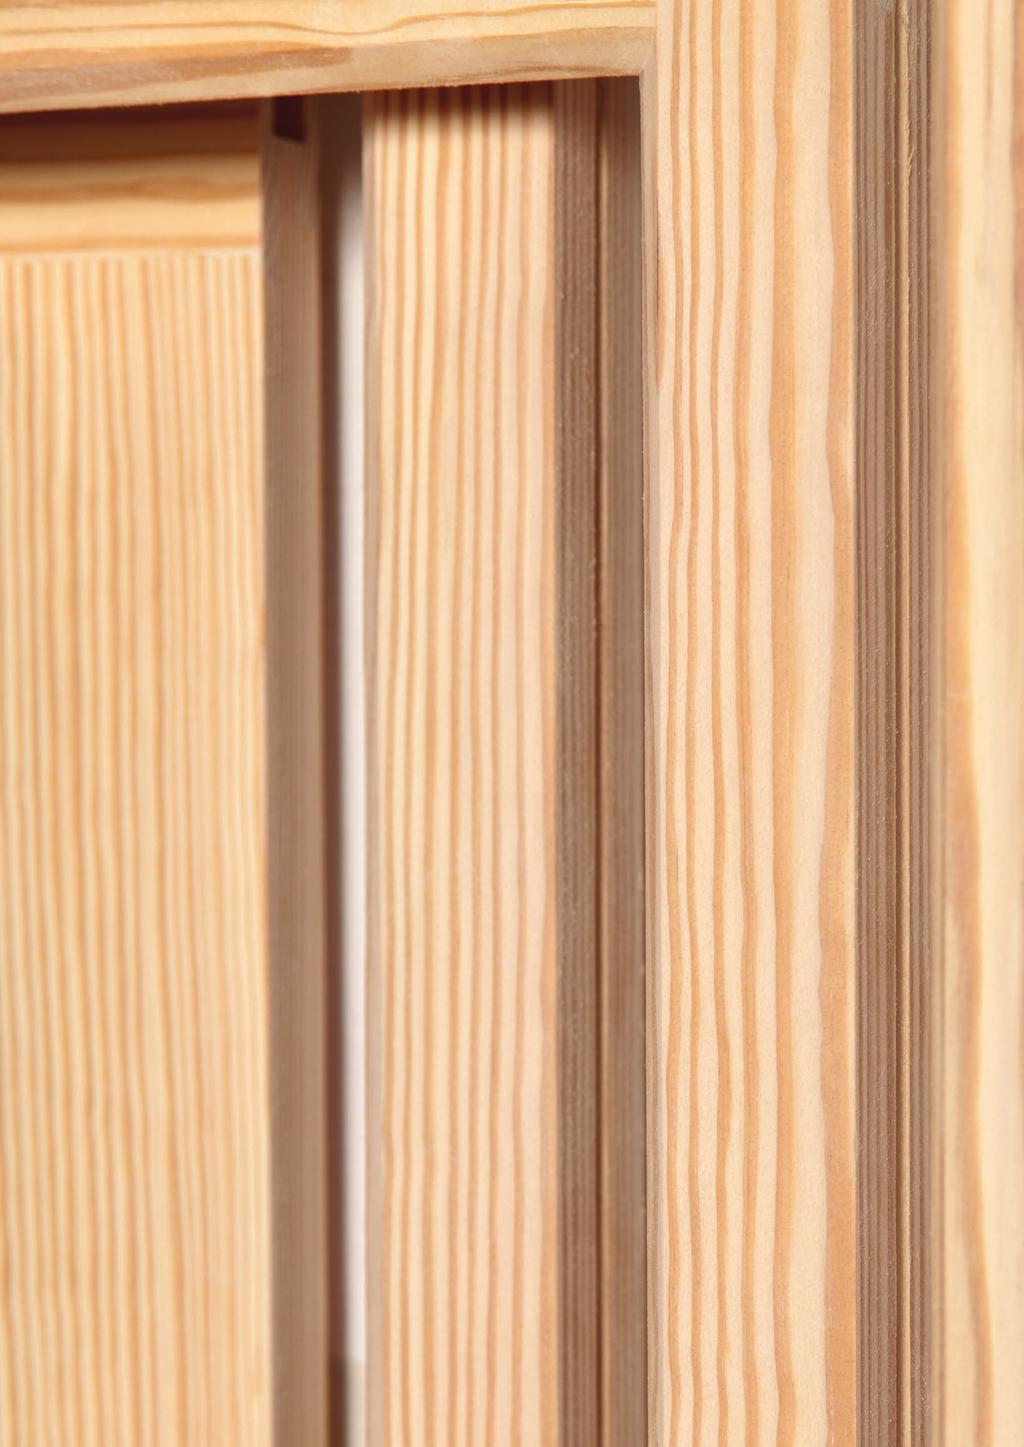 Southern Yellow Pine for Joinery Clear Dense